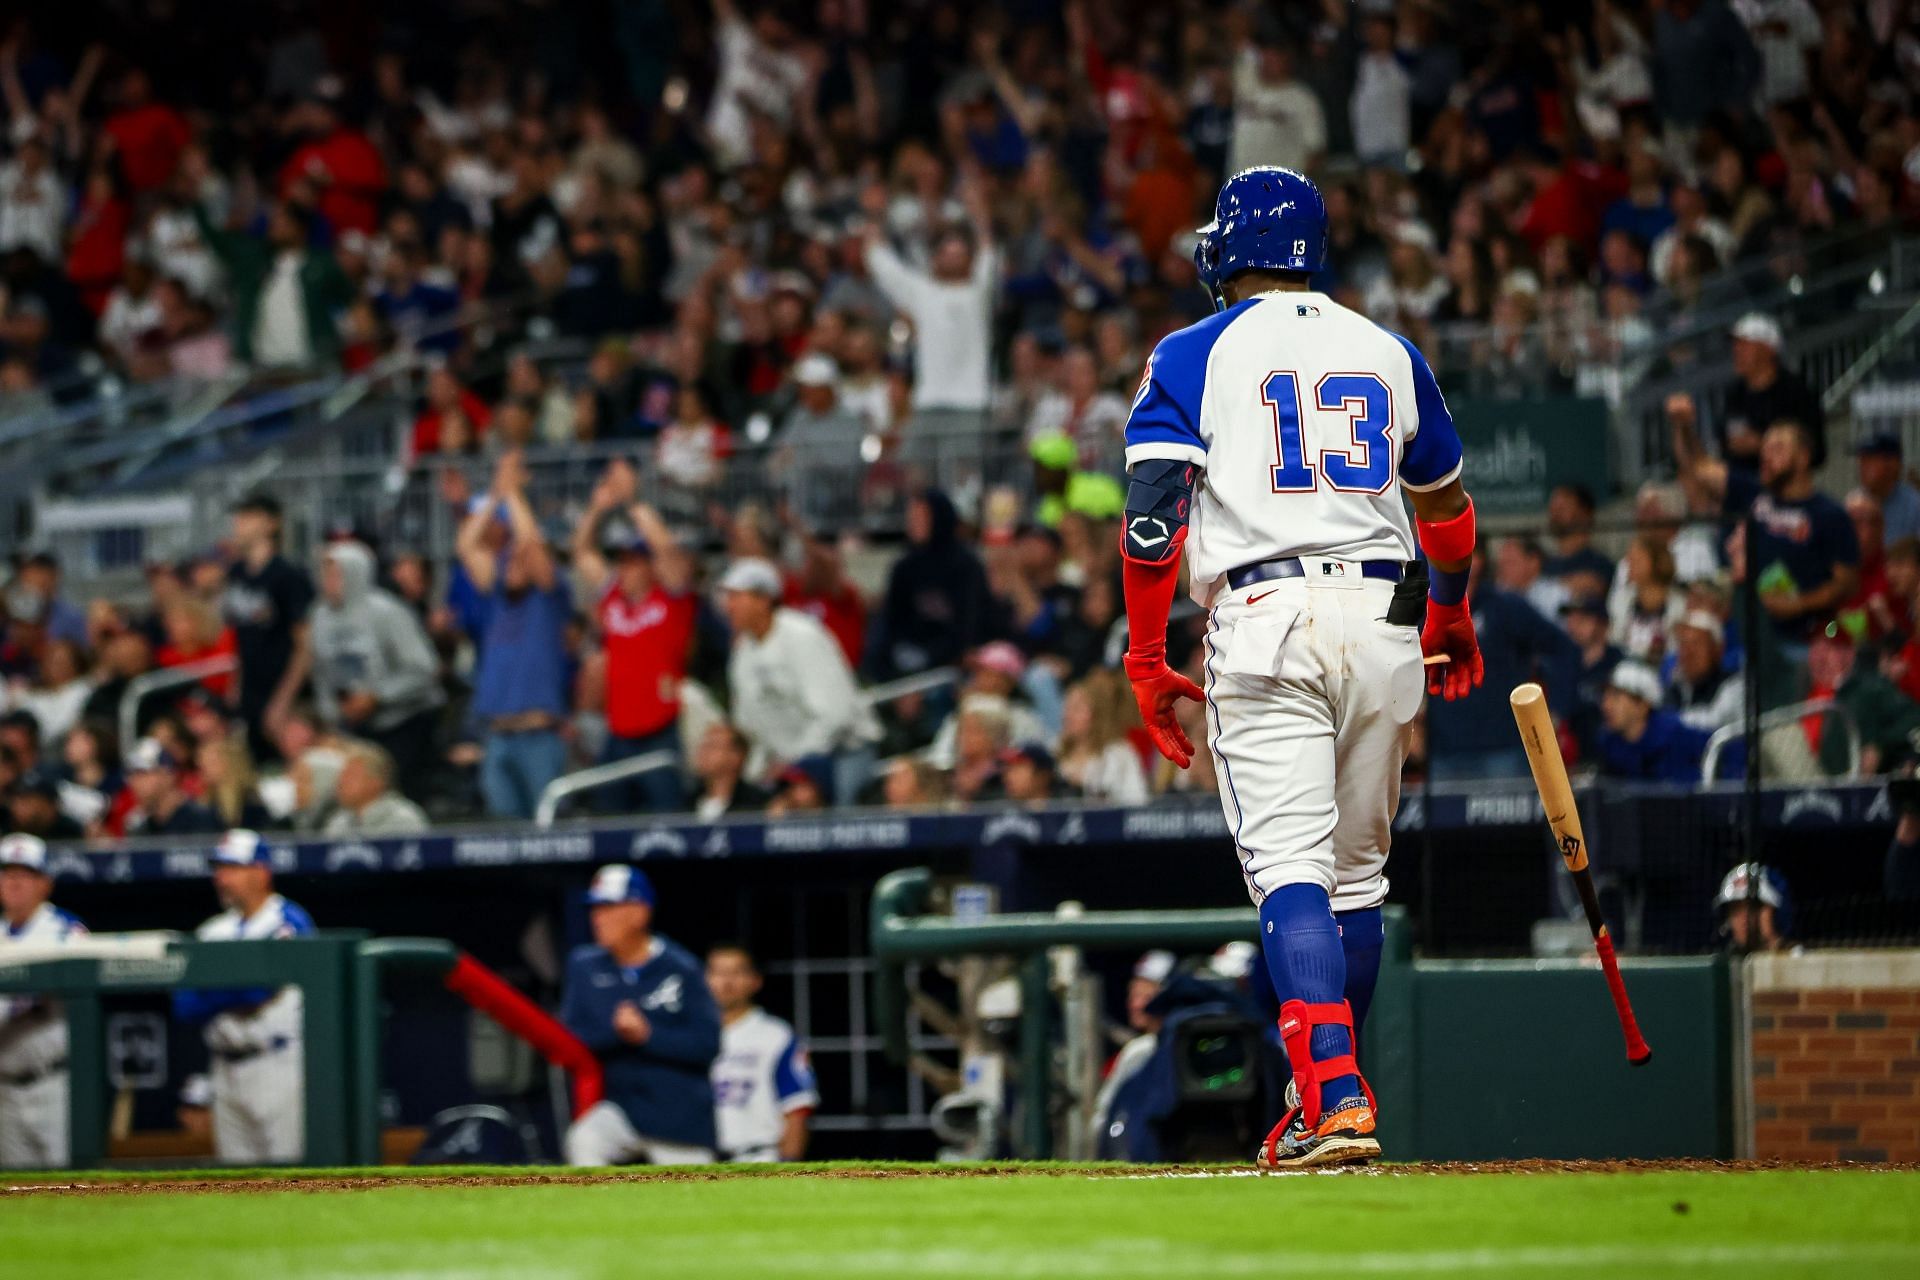 Ronald Acuna Jr. celebrates after launching a home run into the left field bleachers last night. Milwaukee Brewers v Atlanta Braves